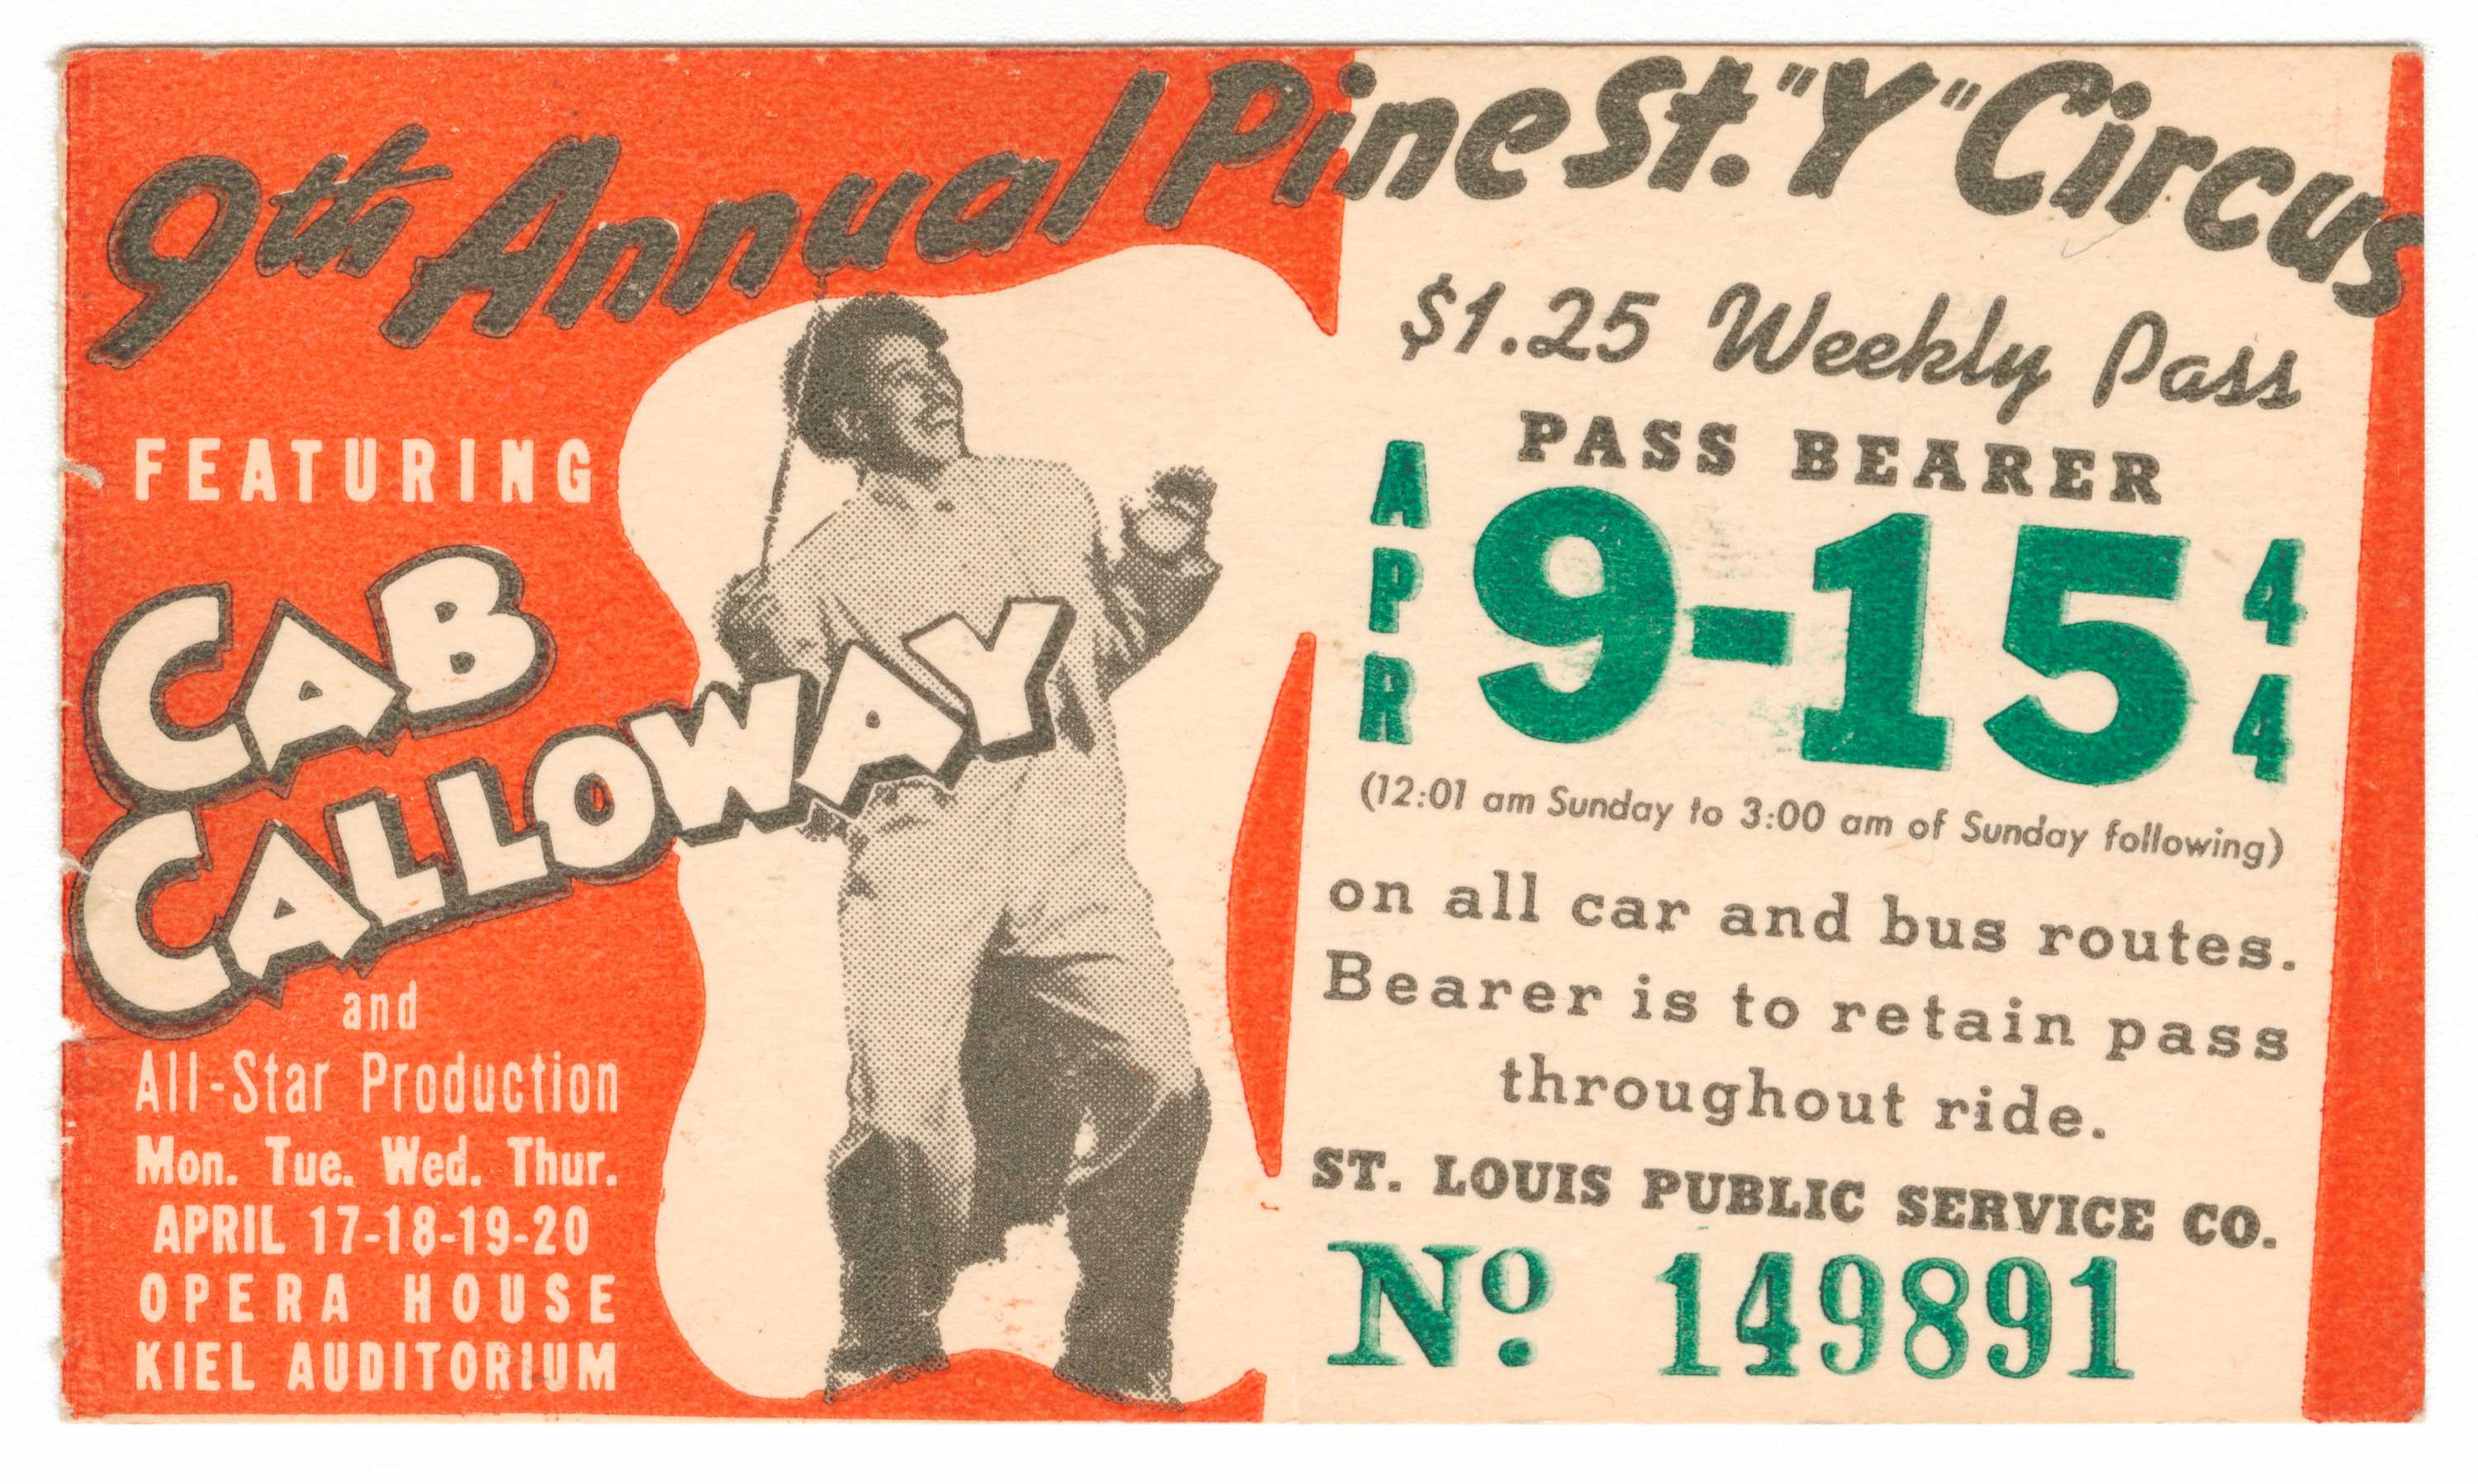 Transit pass for the St. Louis Public Service Company depicting Cab Calloway.